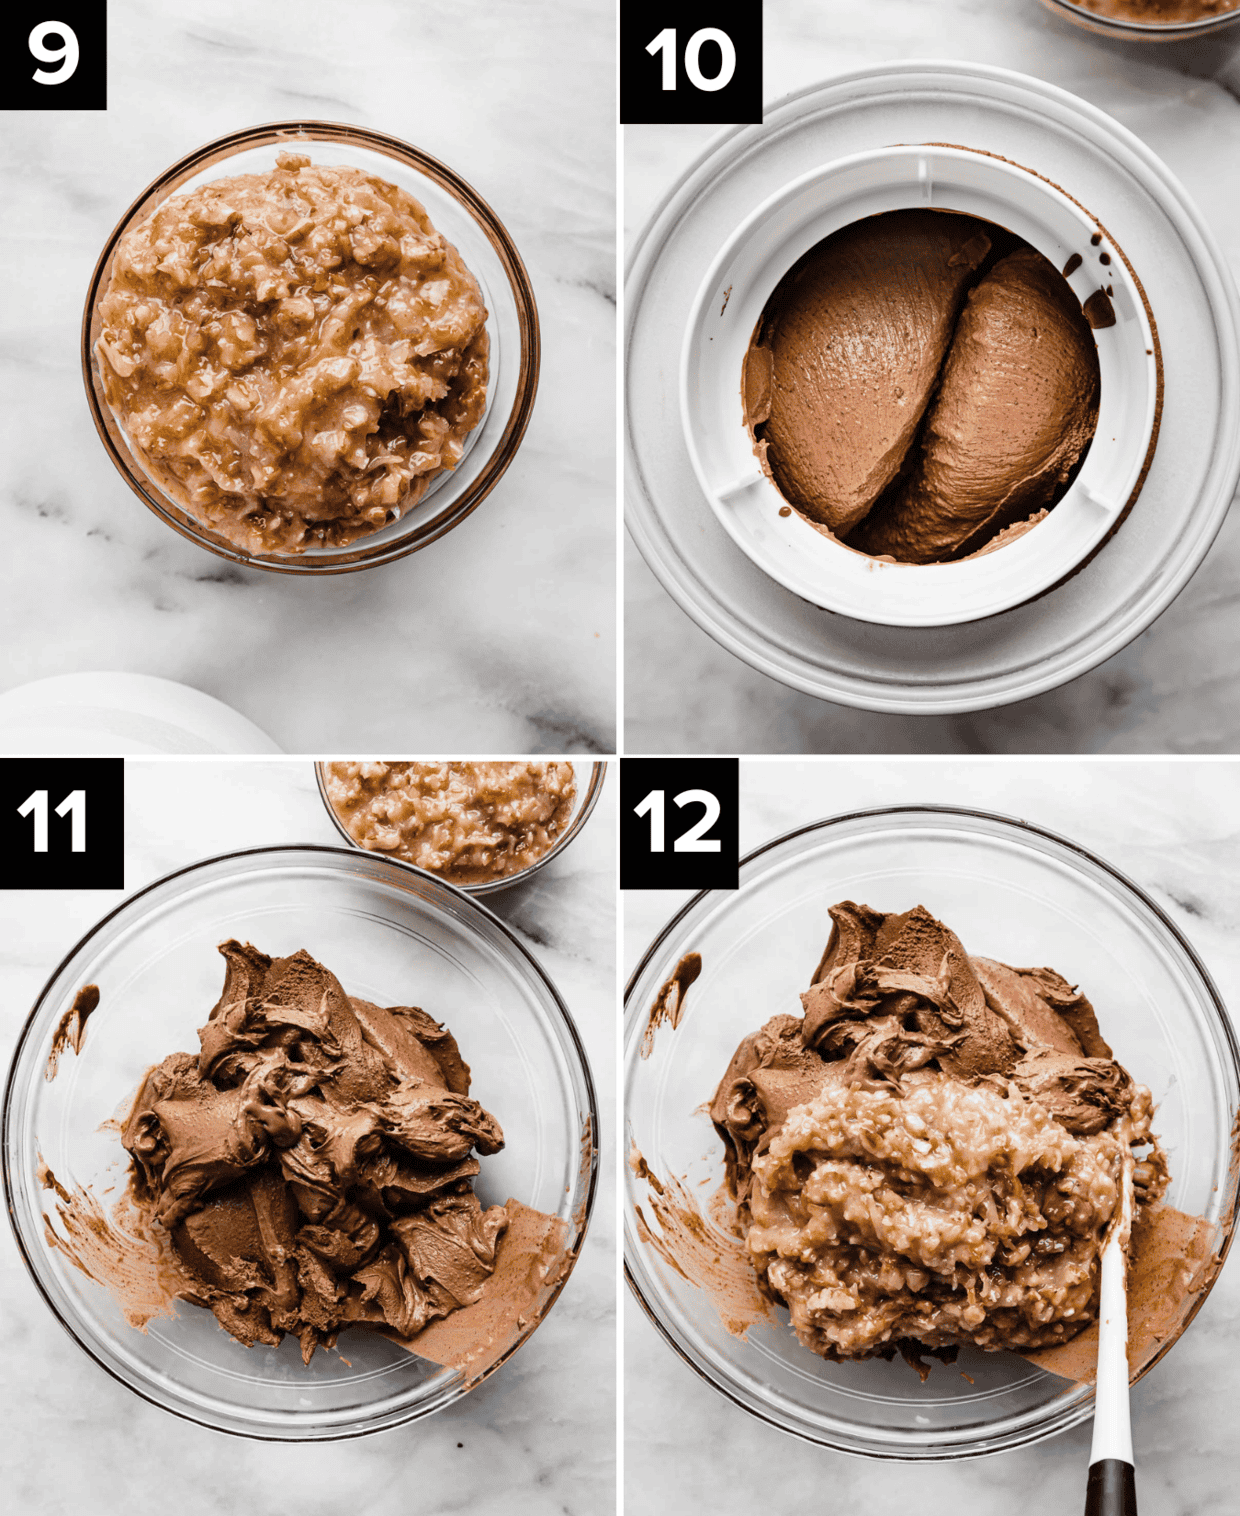 Top left photo is coconut pecan frosting in a glass bowl, top right photo is German Chocolate ice cream churning in an ice cream maker, bottom left photo is churned chocolate ice cream in a glass bowl, bottom right photo is coconut pecan frosting on dark chocolate ice cream.